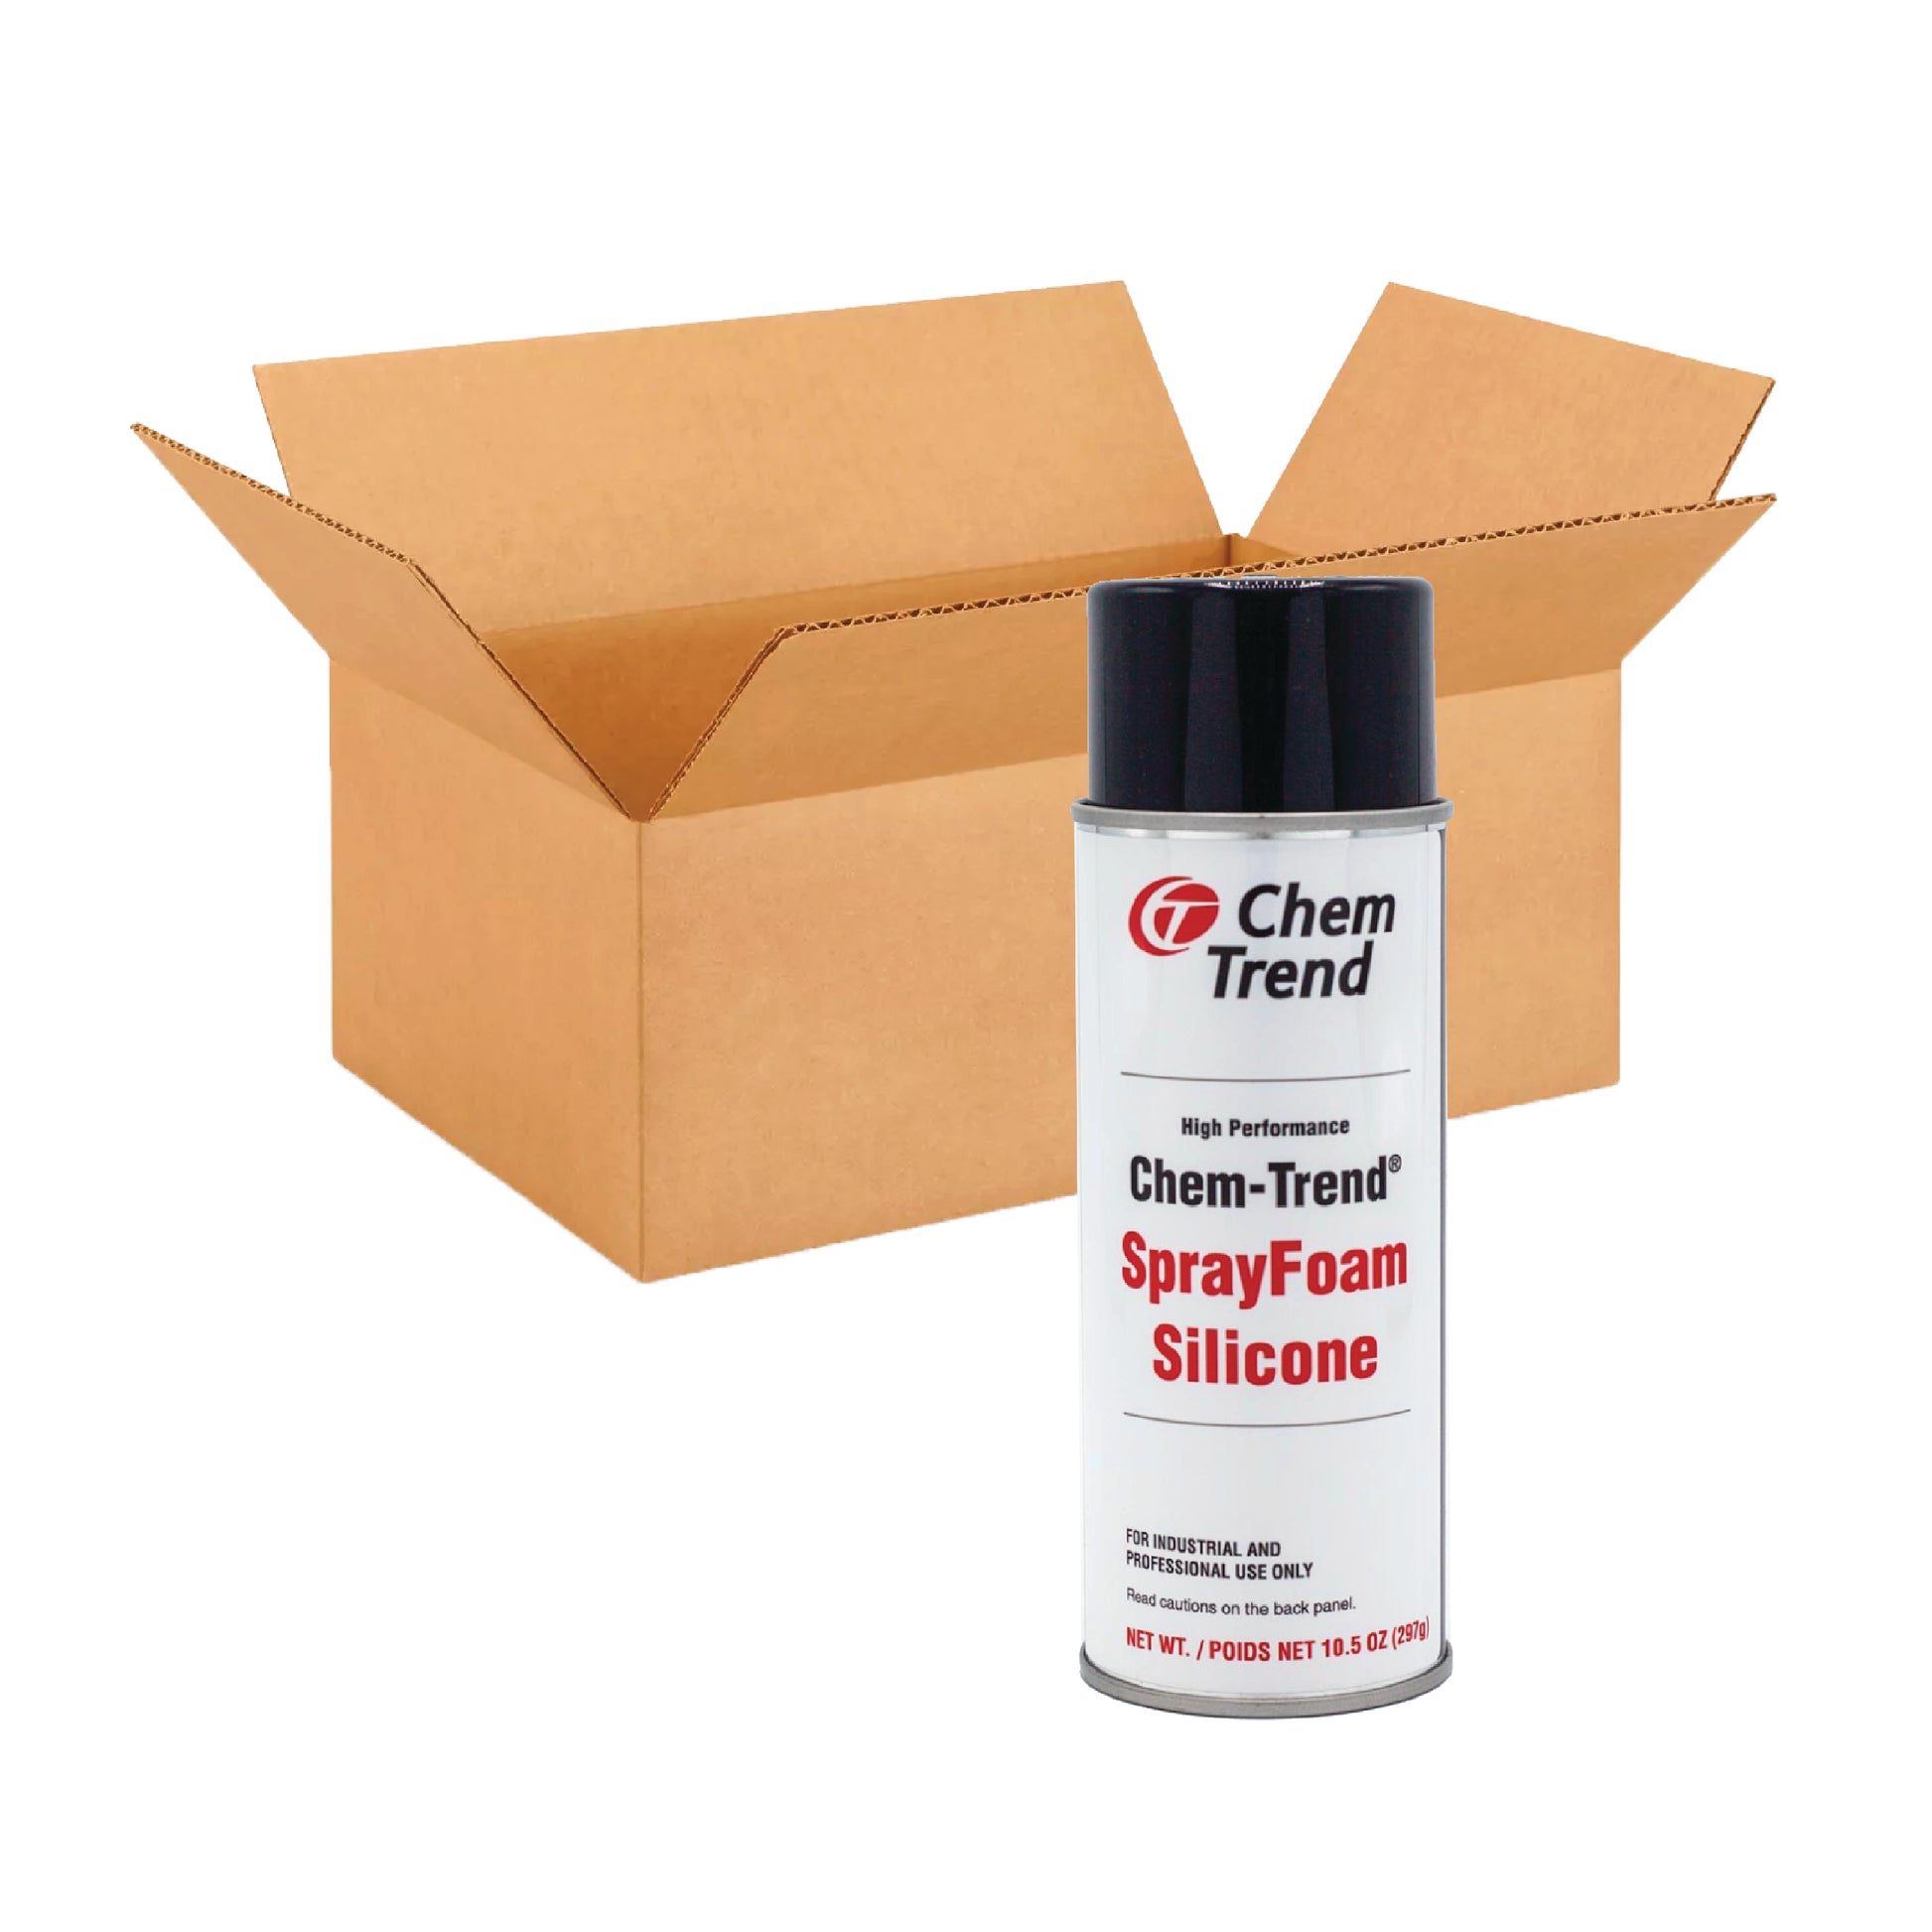 Chem-Trend Spray Foam Silicone Release (one can)